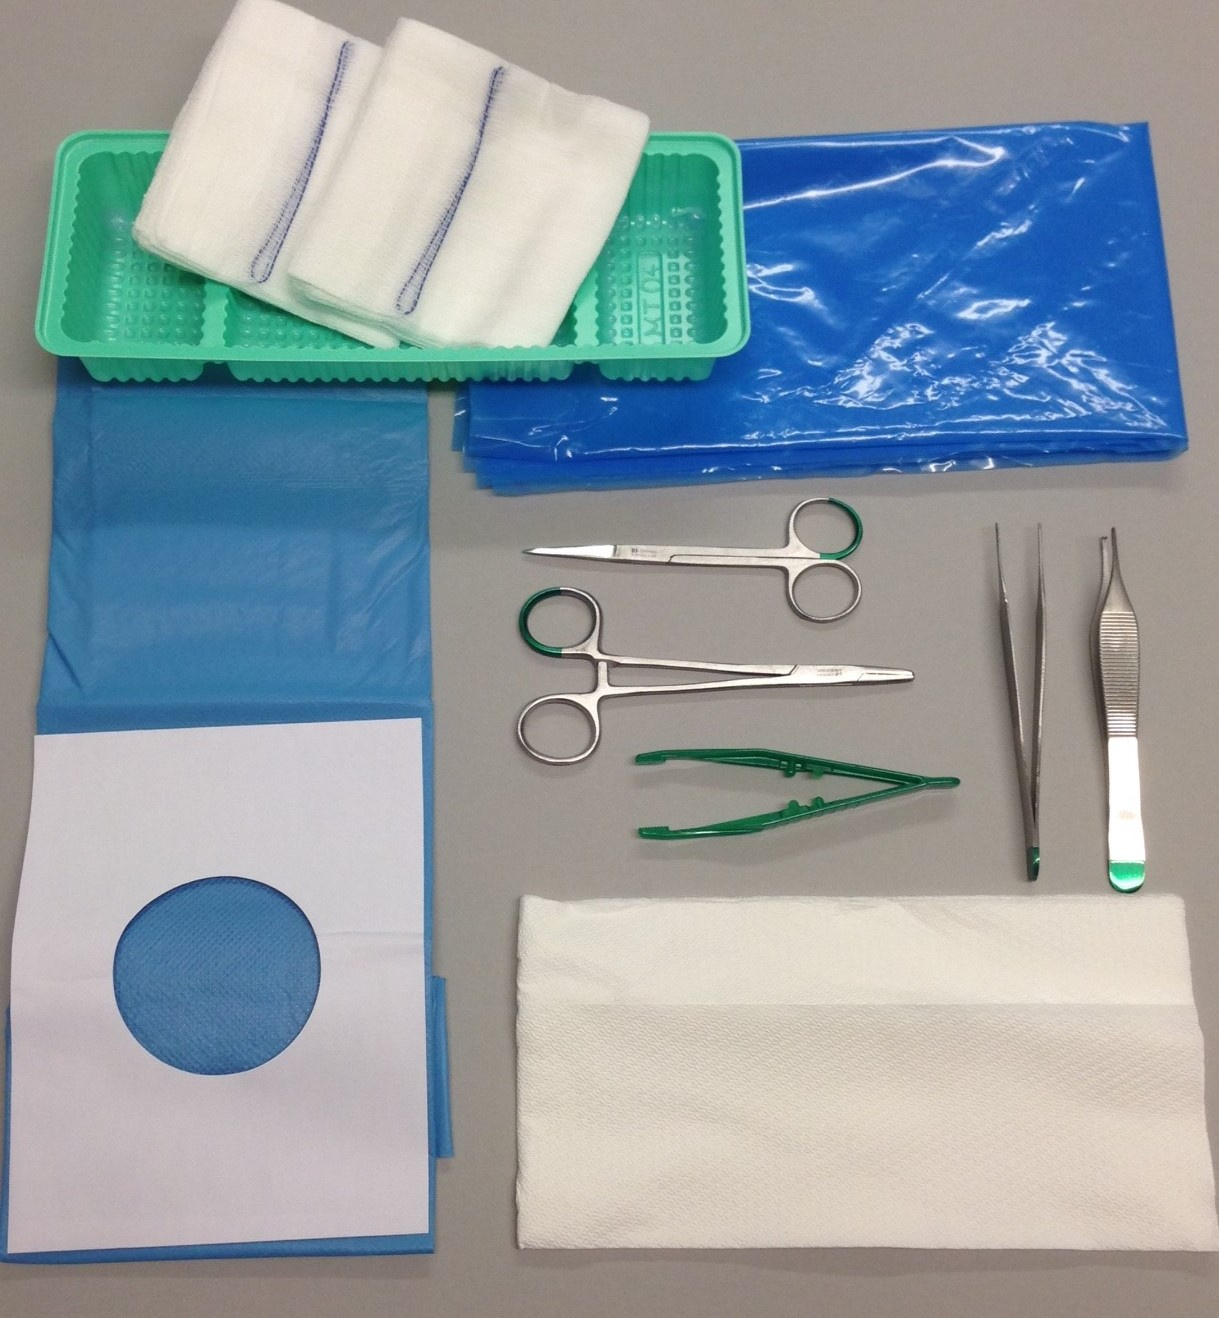 Defries Suture kit with 5 disposable intruments and drapes